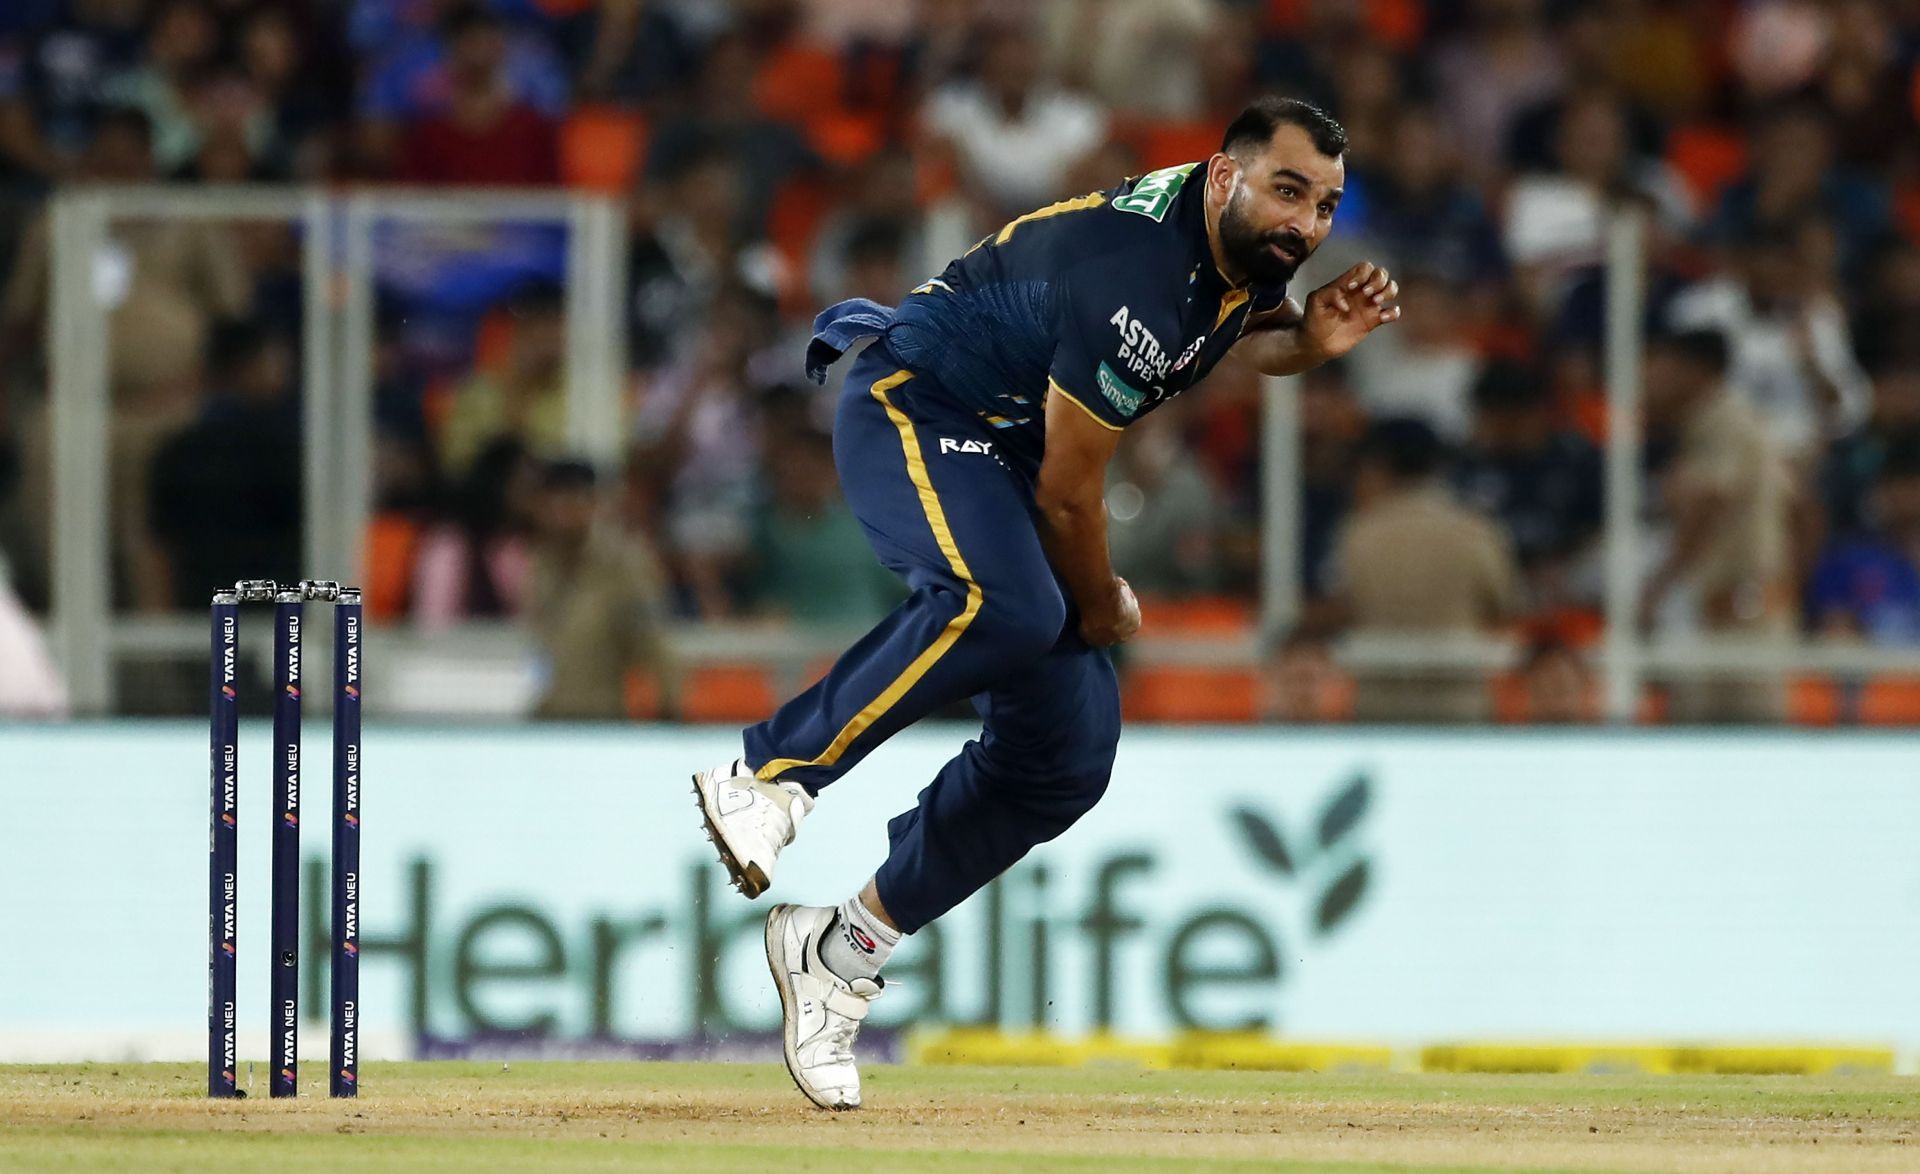 Mohammed Shami in action in the IPL.